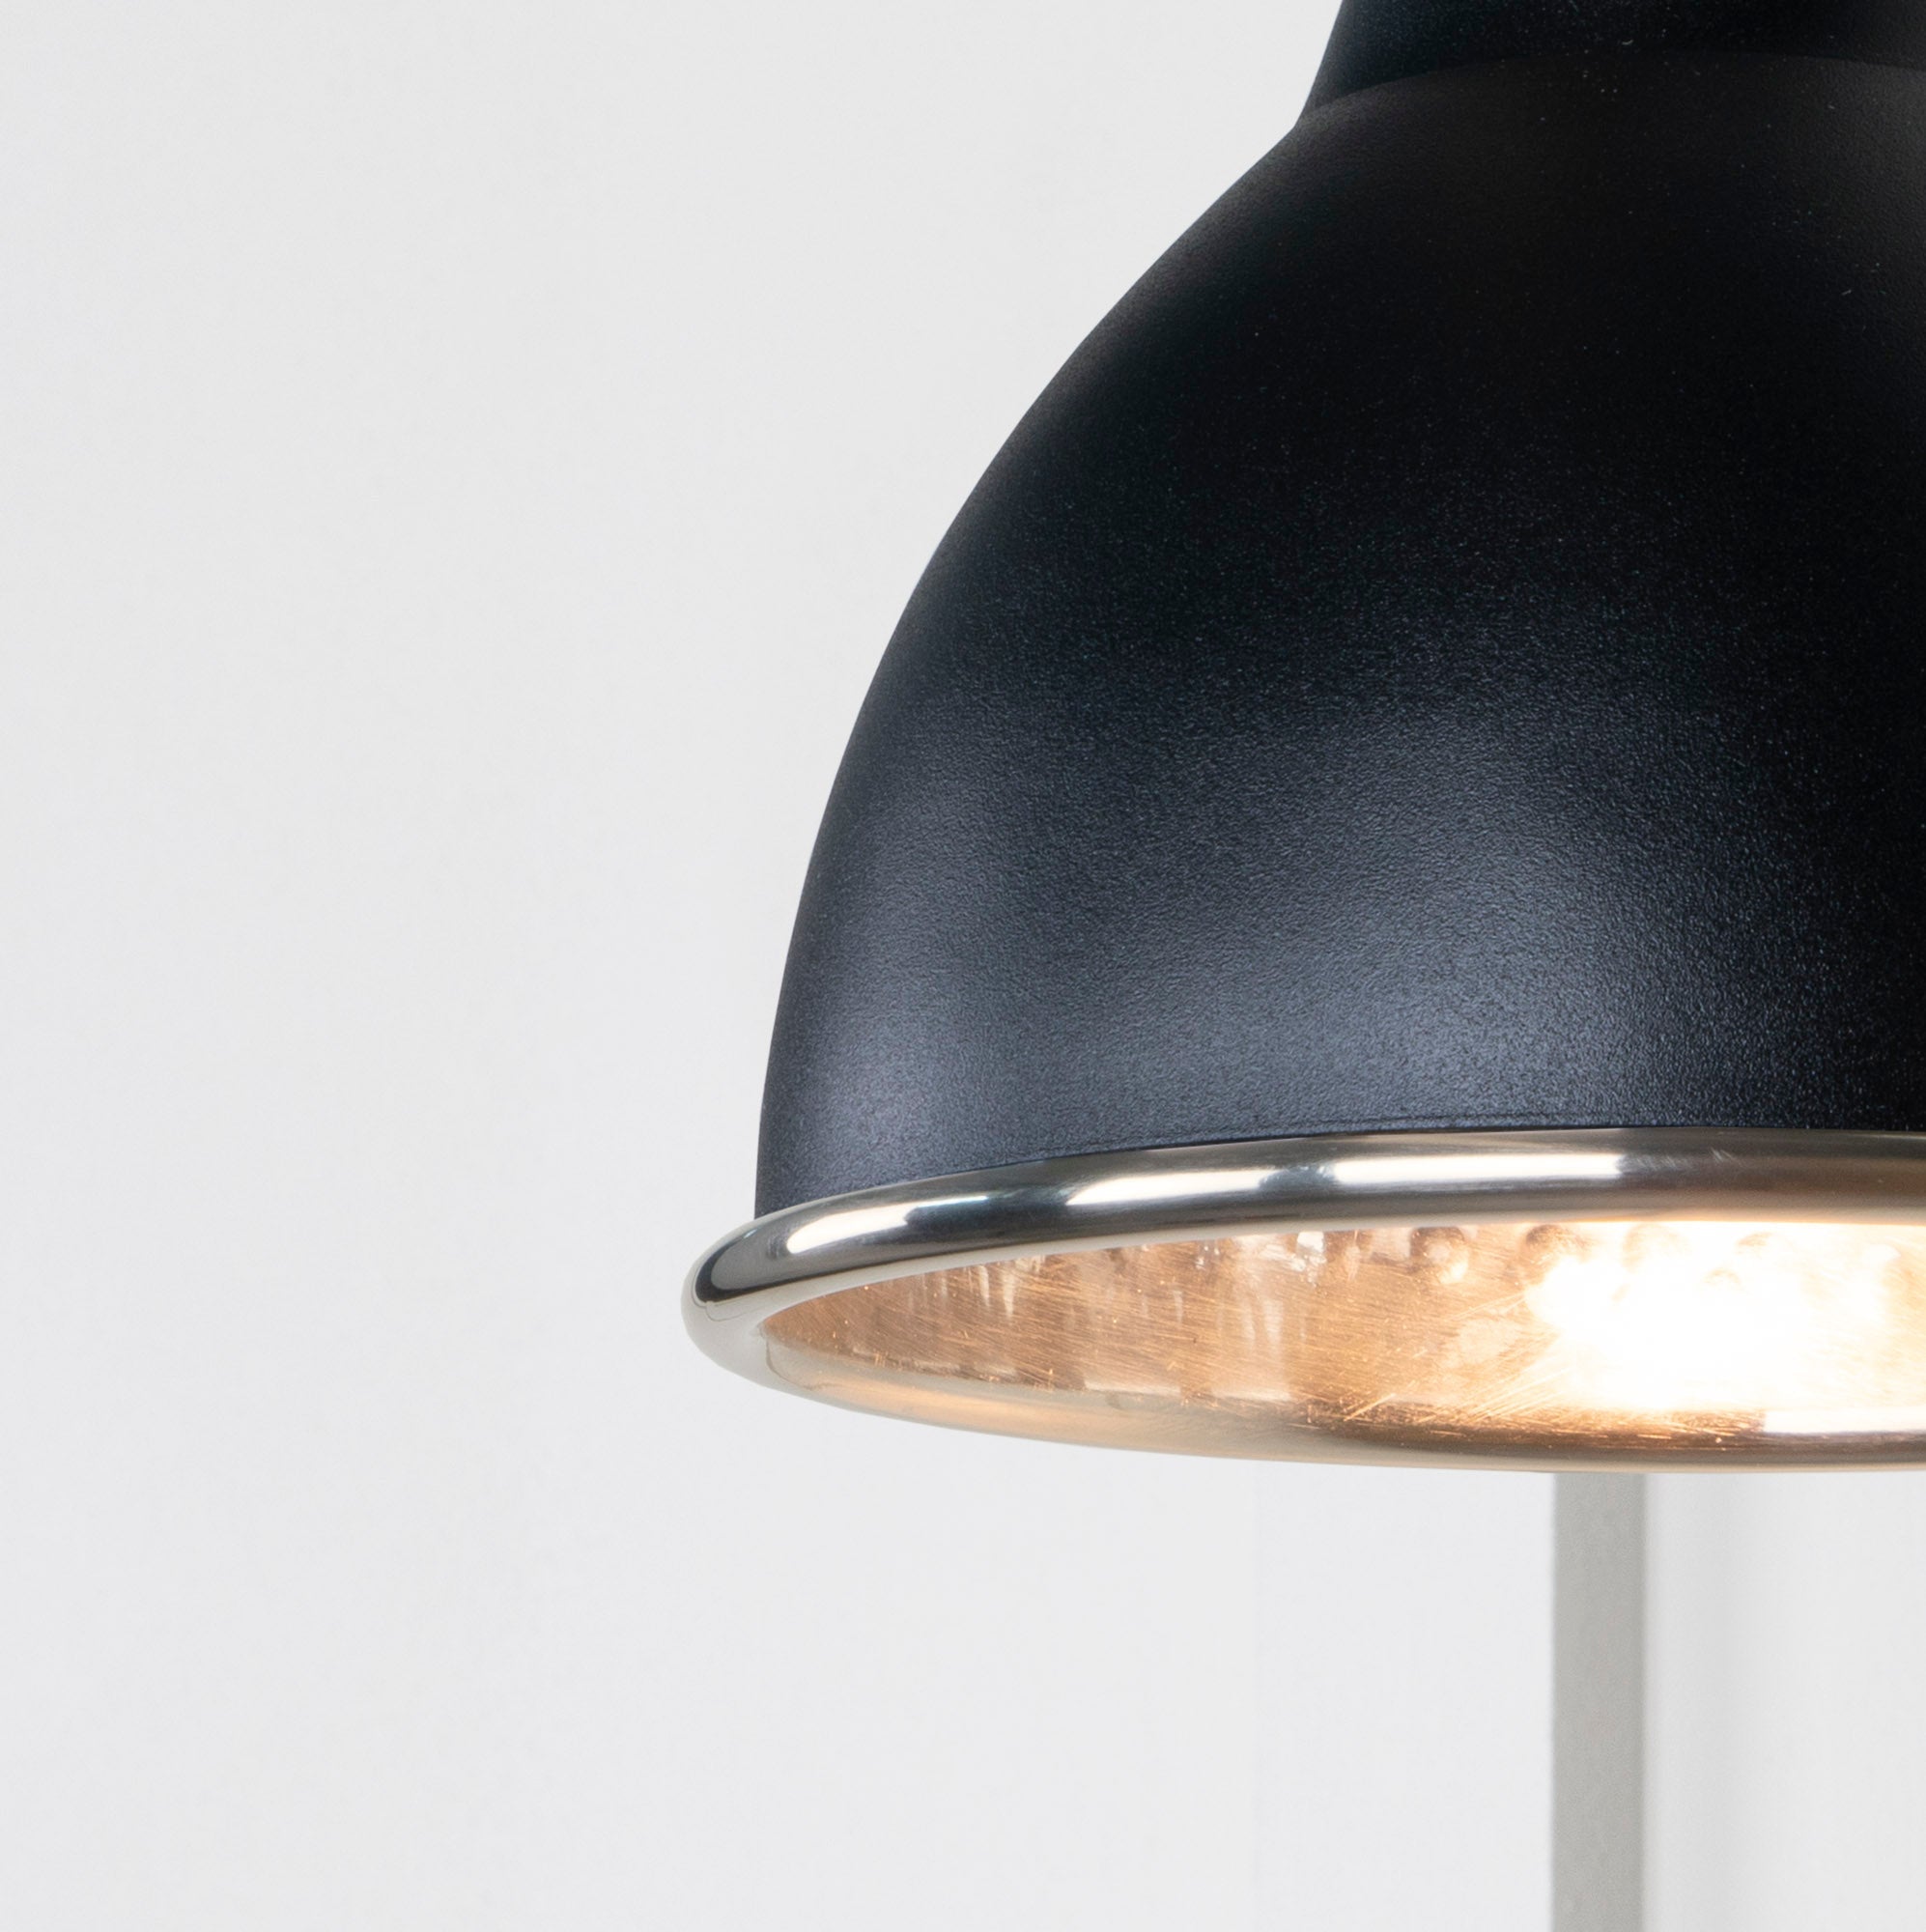 SHOW Close Up image of Brindley Wall Light in Elan Black in Hammered Nickel